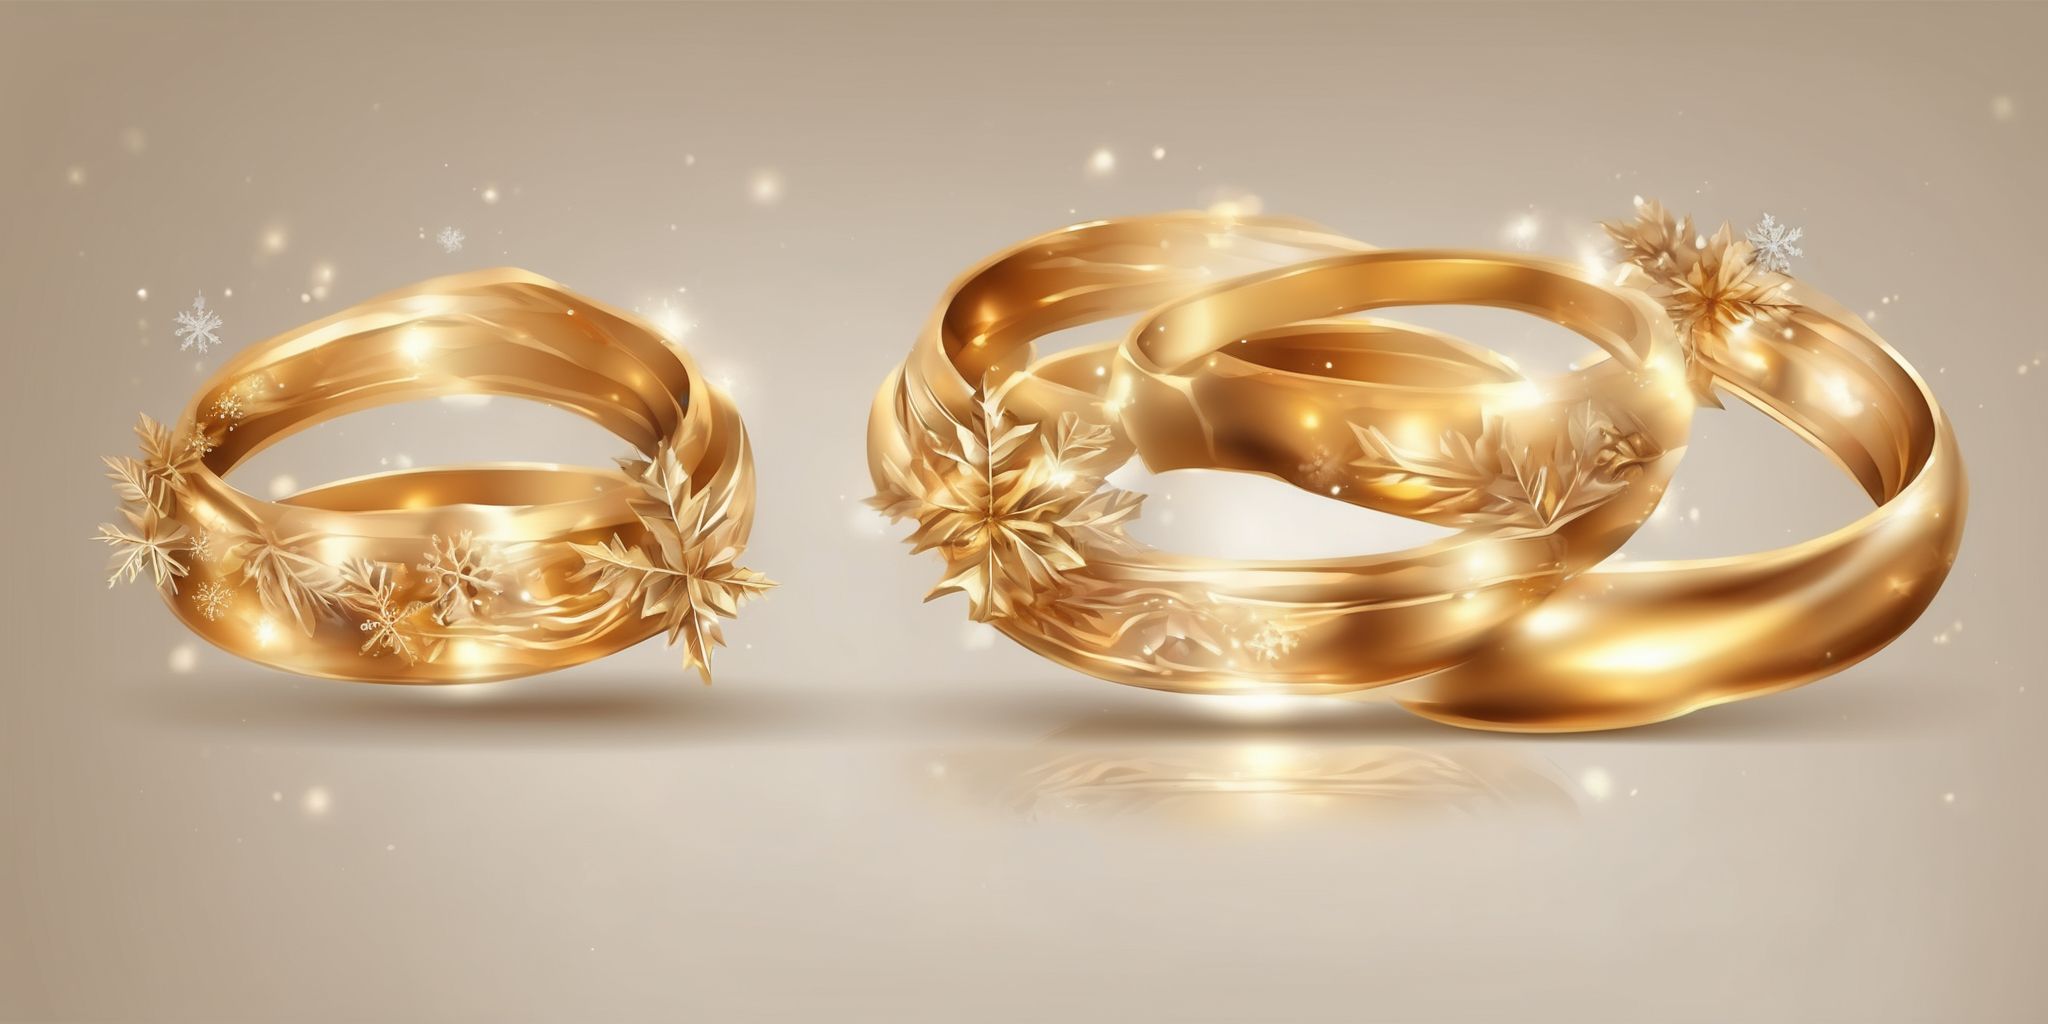 Golden Rings in realistic Christmas style